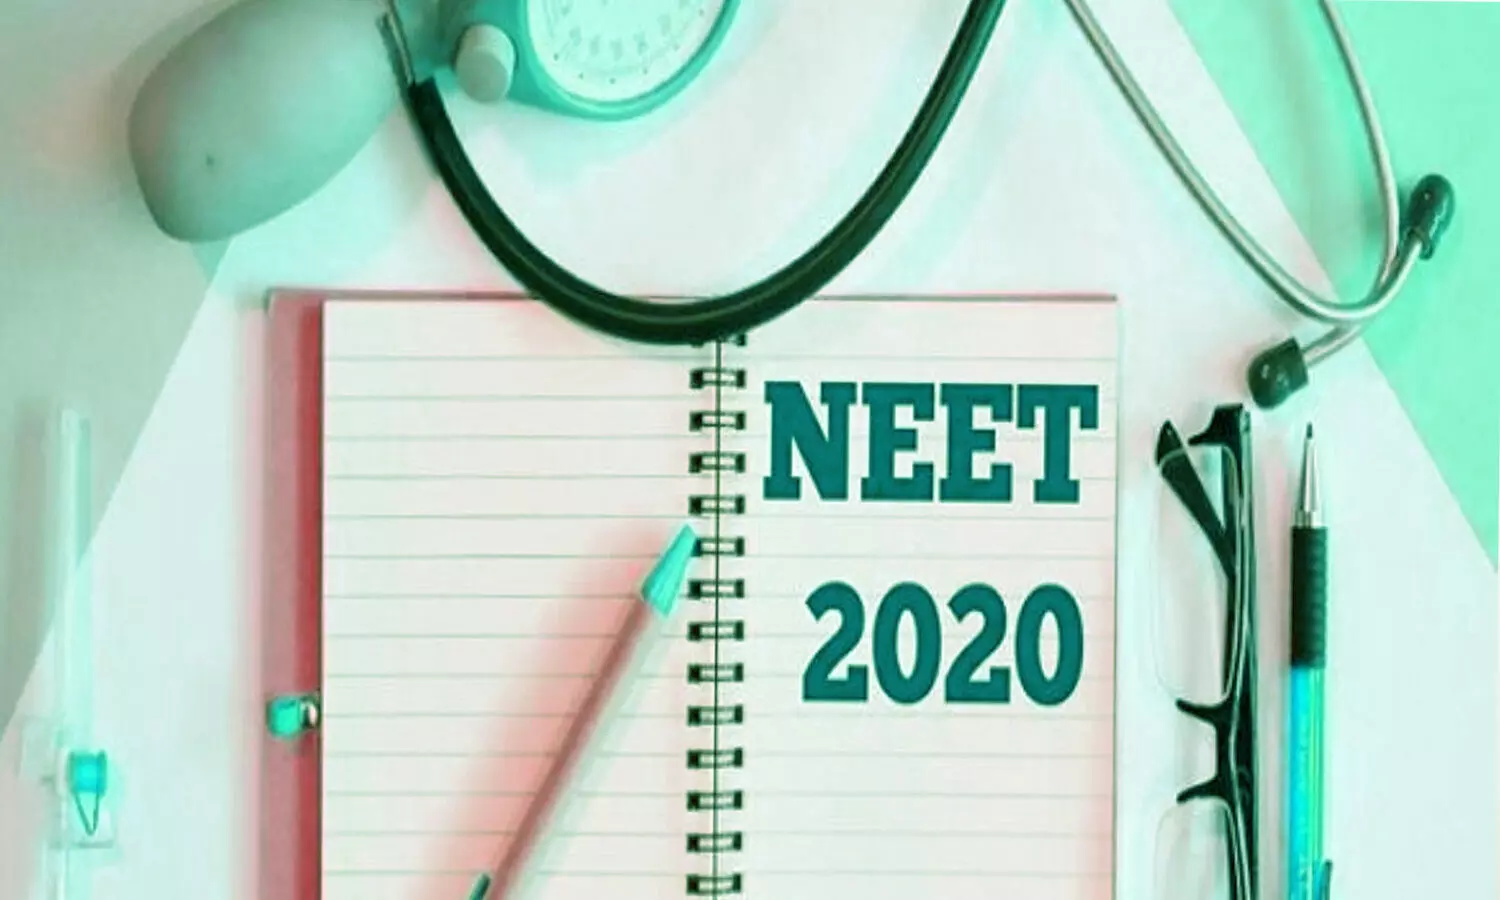 Verification of Scanned Images of OMR Answer Sheets, Recorded Responses for NEET 2020: NTA issues notice